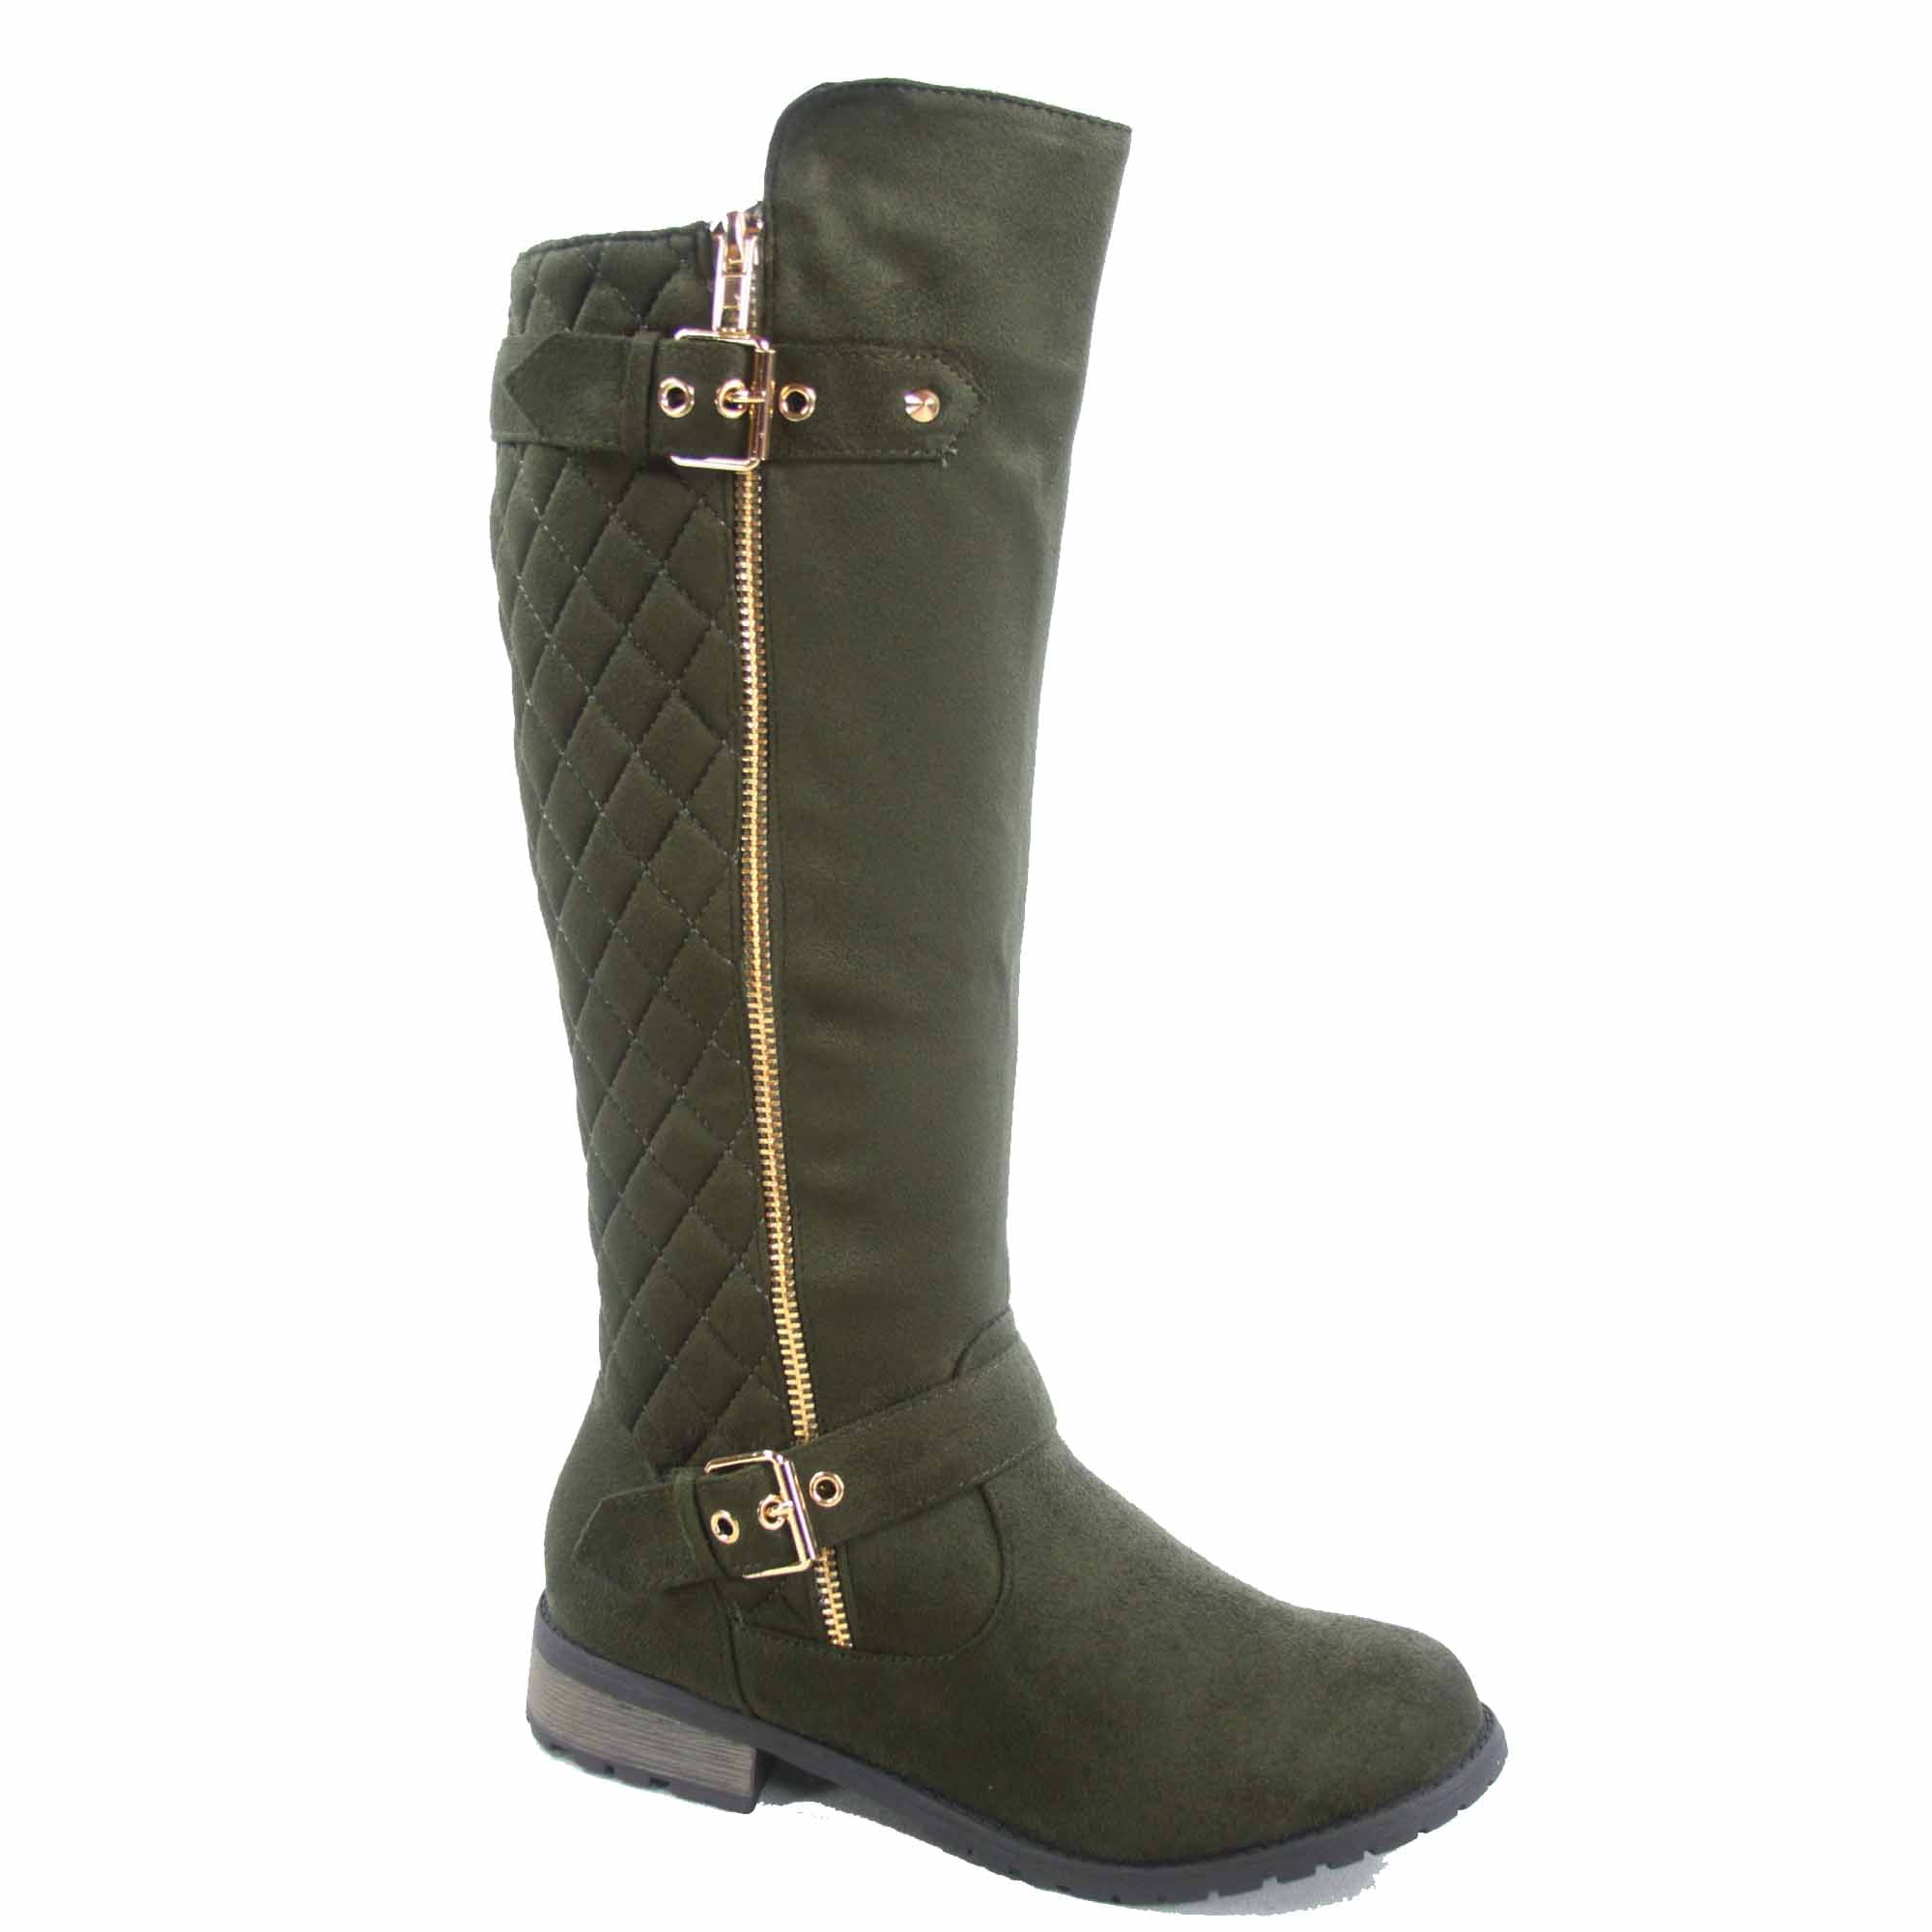 Platform Low Stacked Boots Simple Round Toe Buckle Strap Womens Dressy Knee High Boots with Zipper